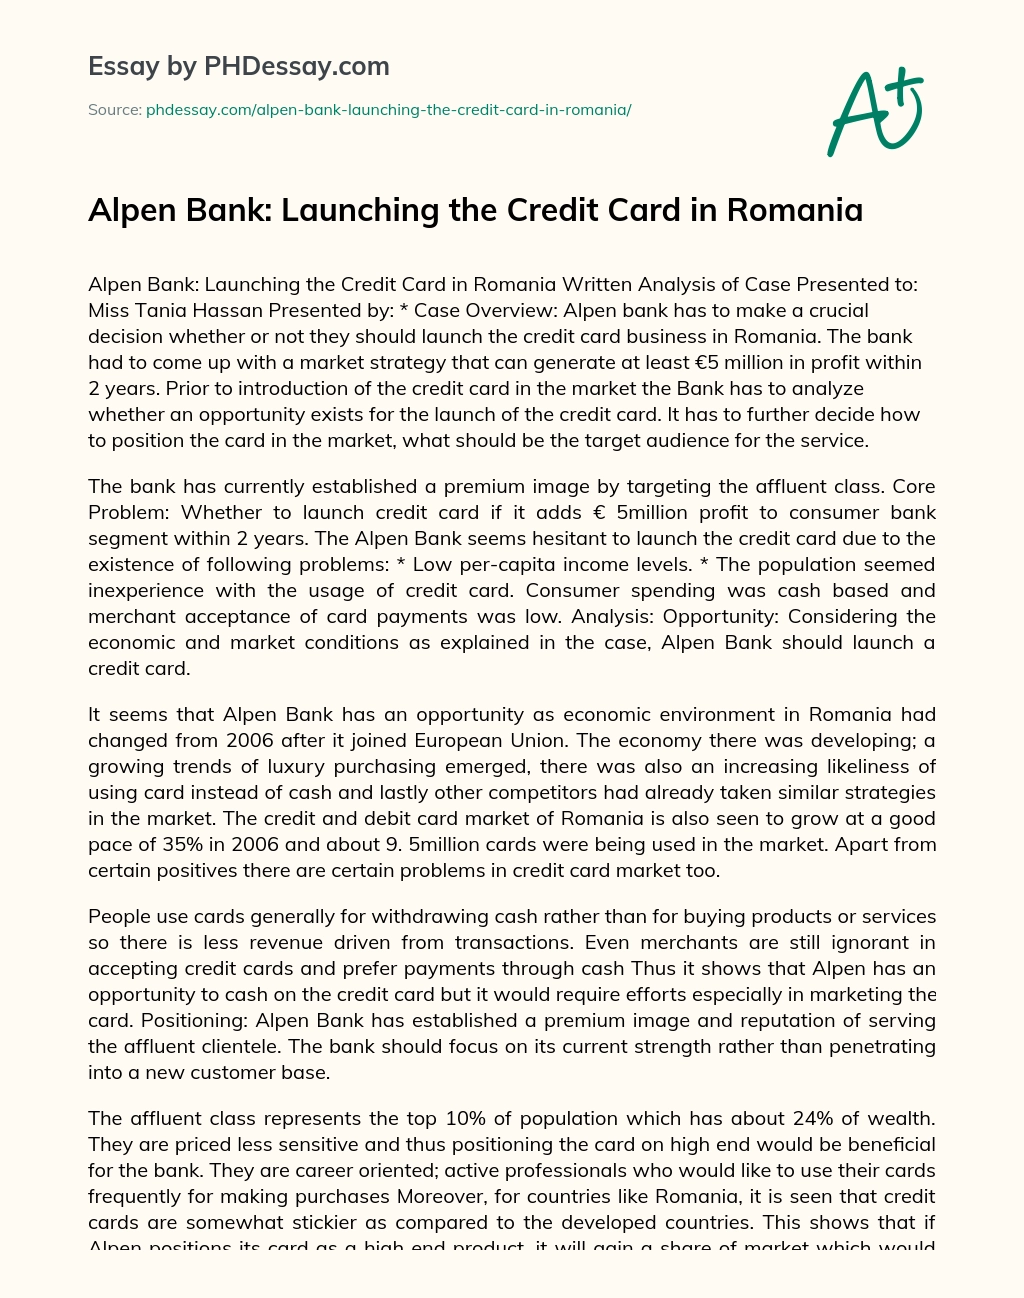 Alpen Bank: Launching the Credit Card in Romania essay